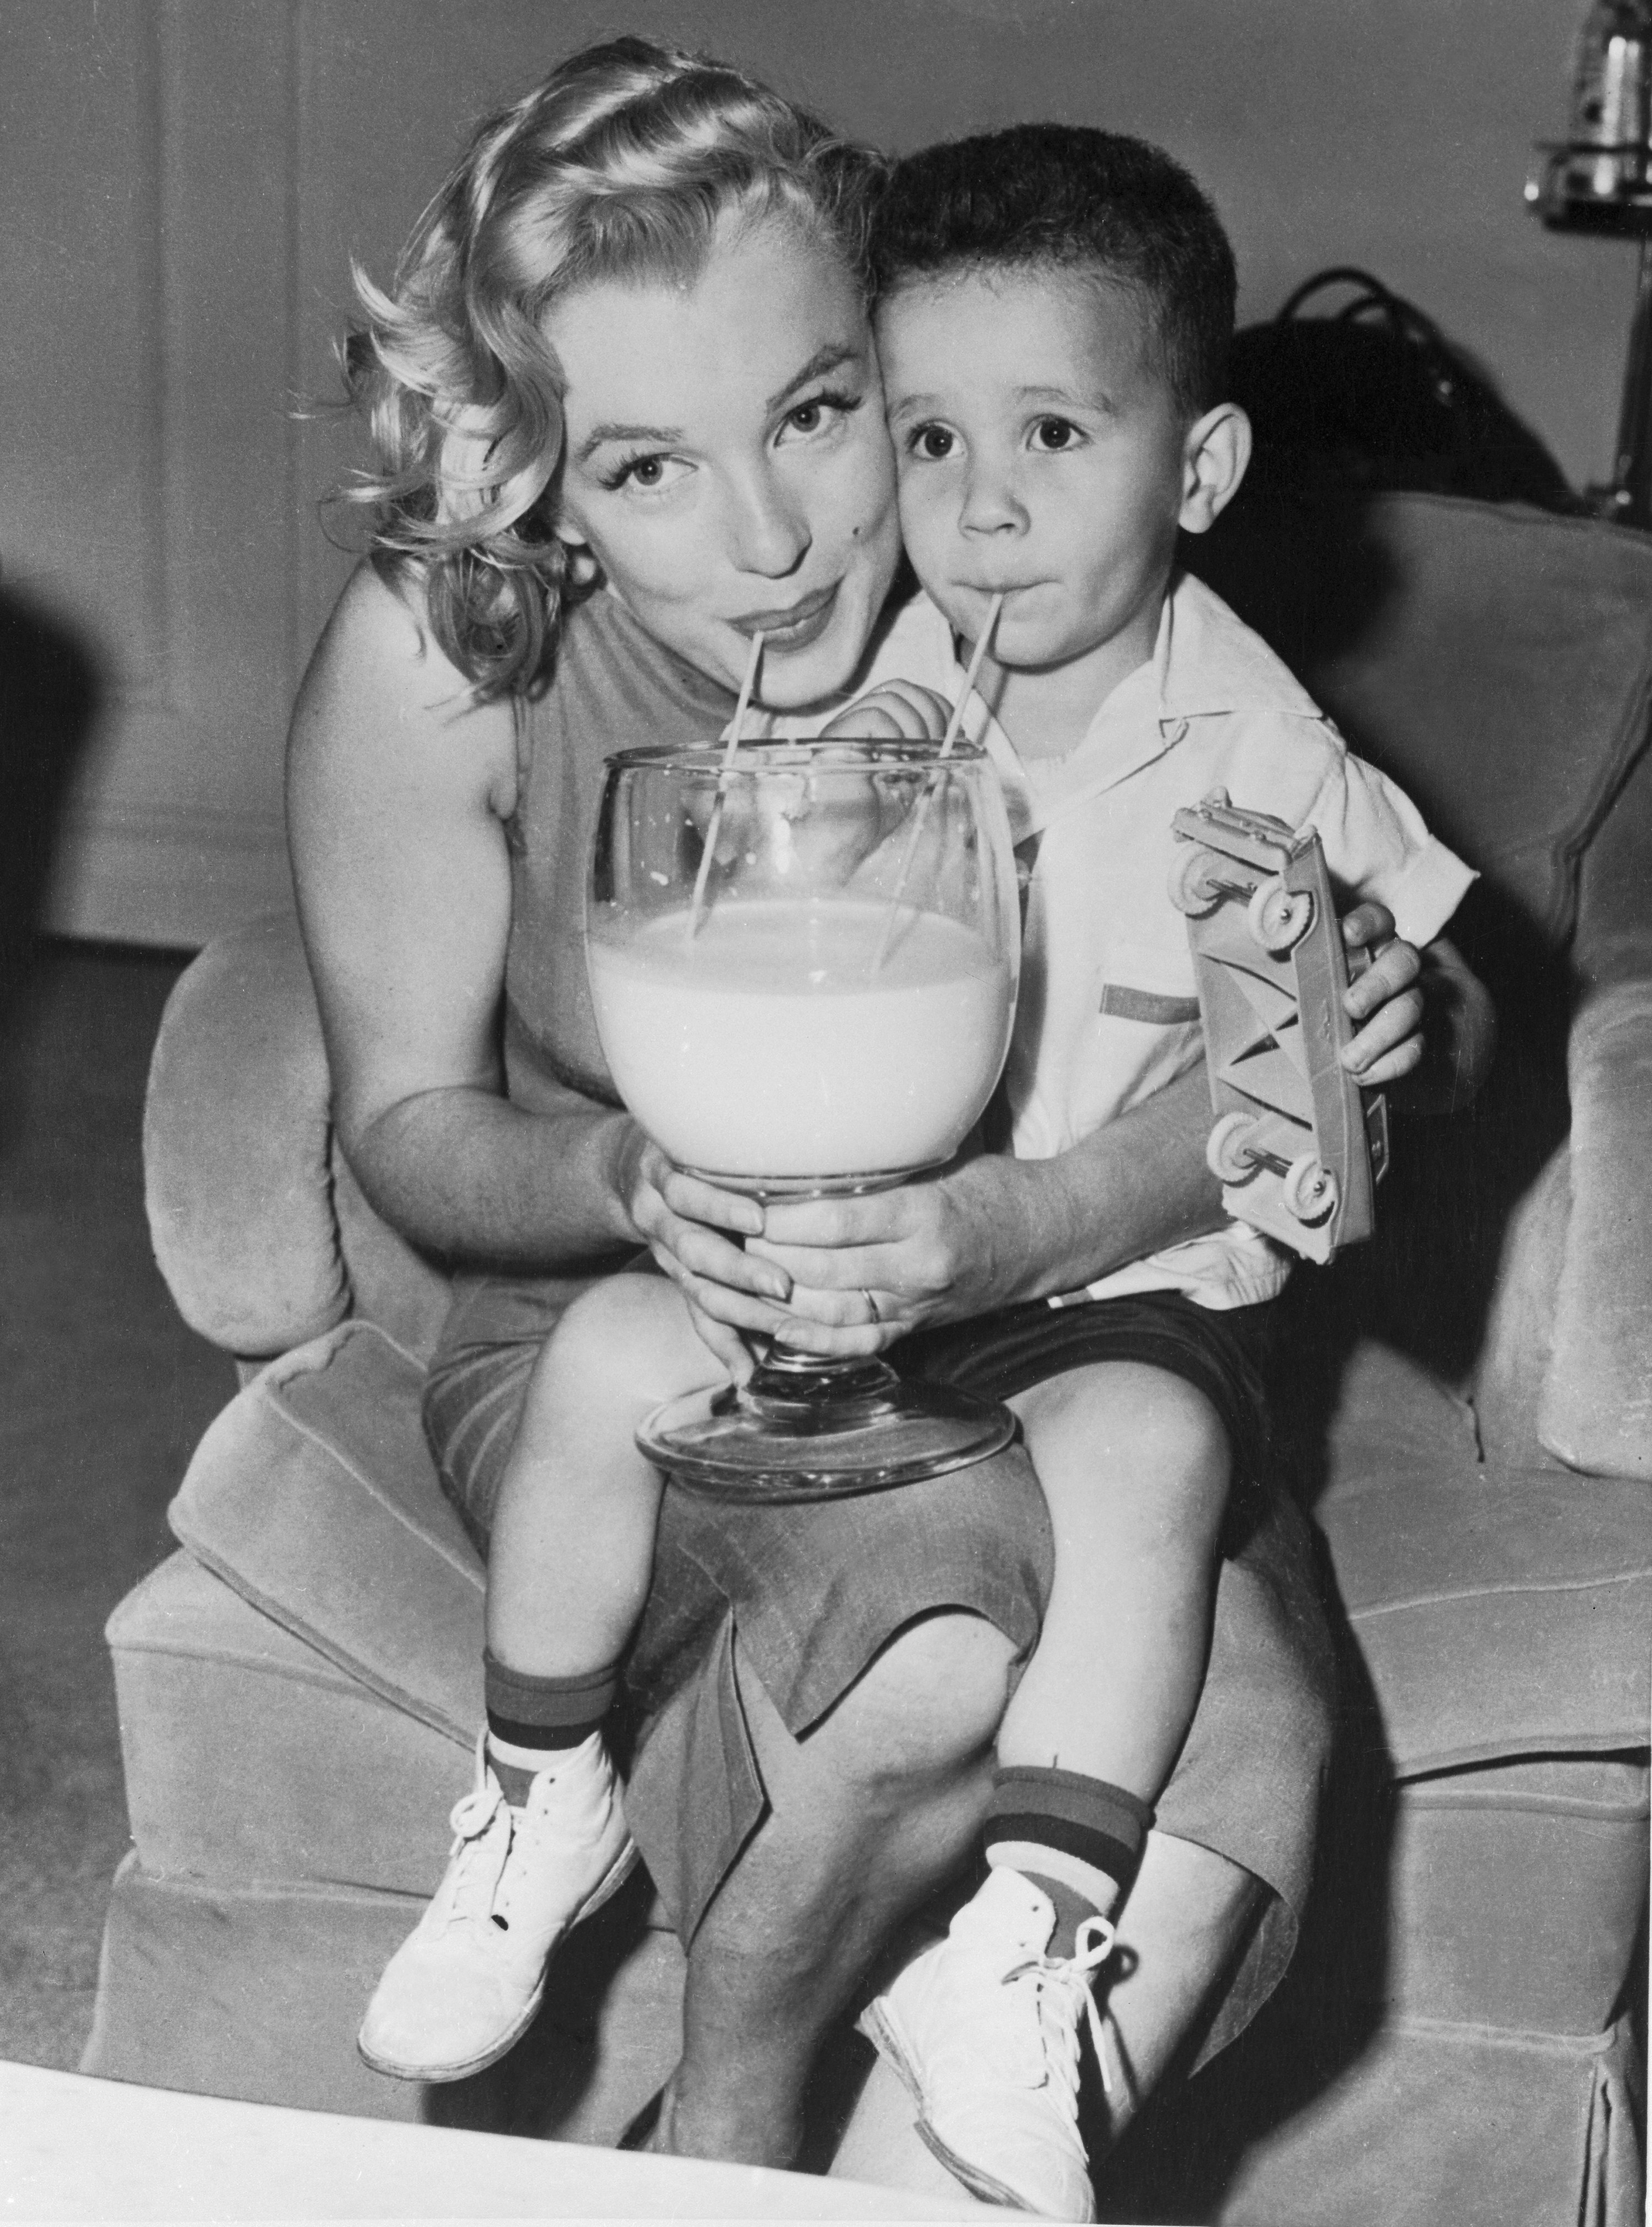 Marilyn Monroe sips milk with William Metzler, who was a Milk Fund beneficiary